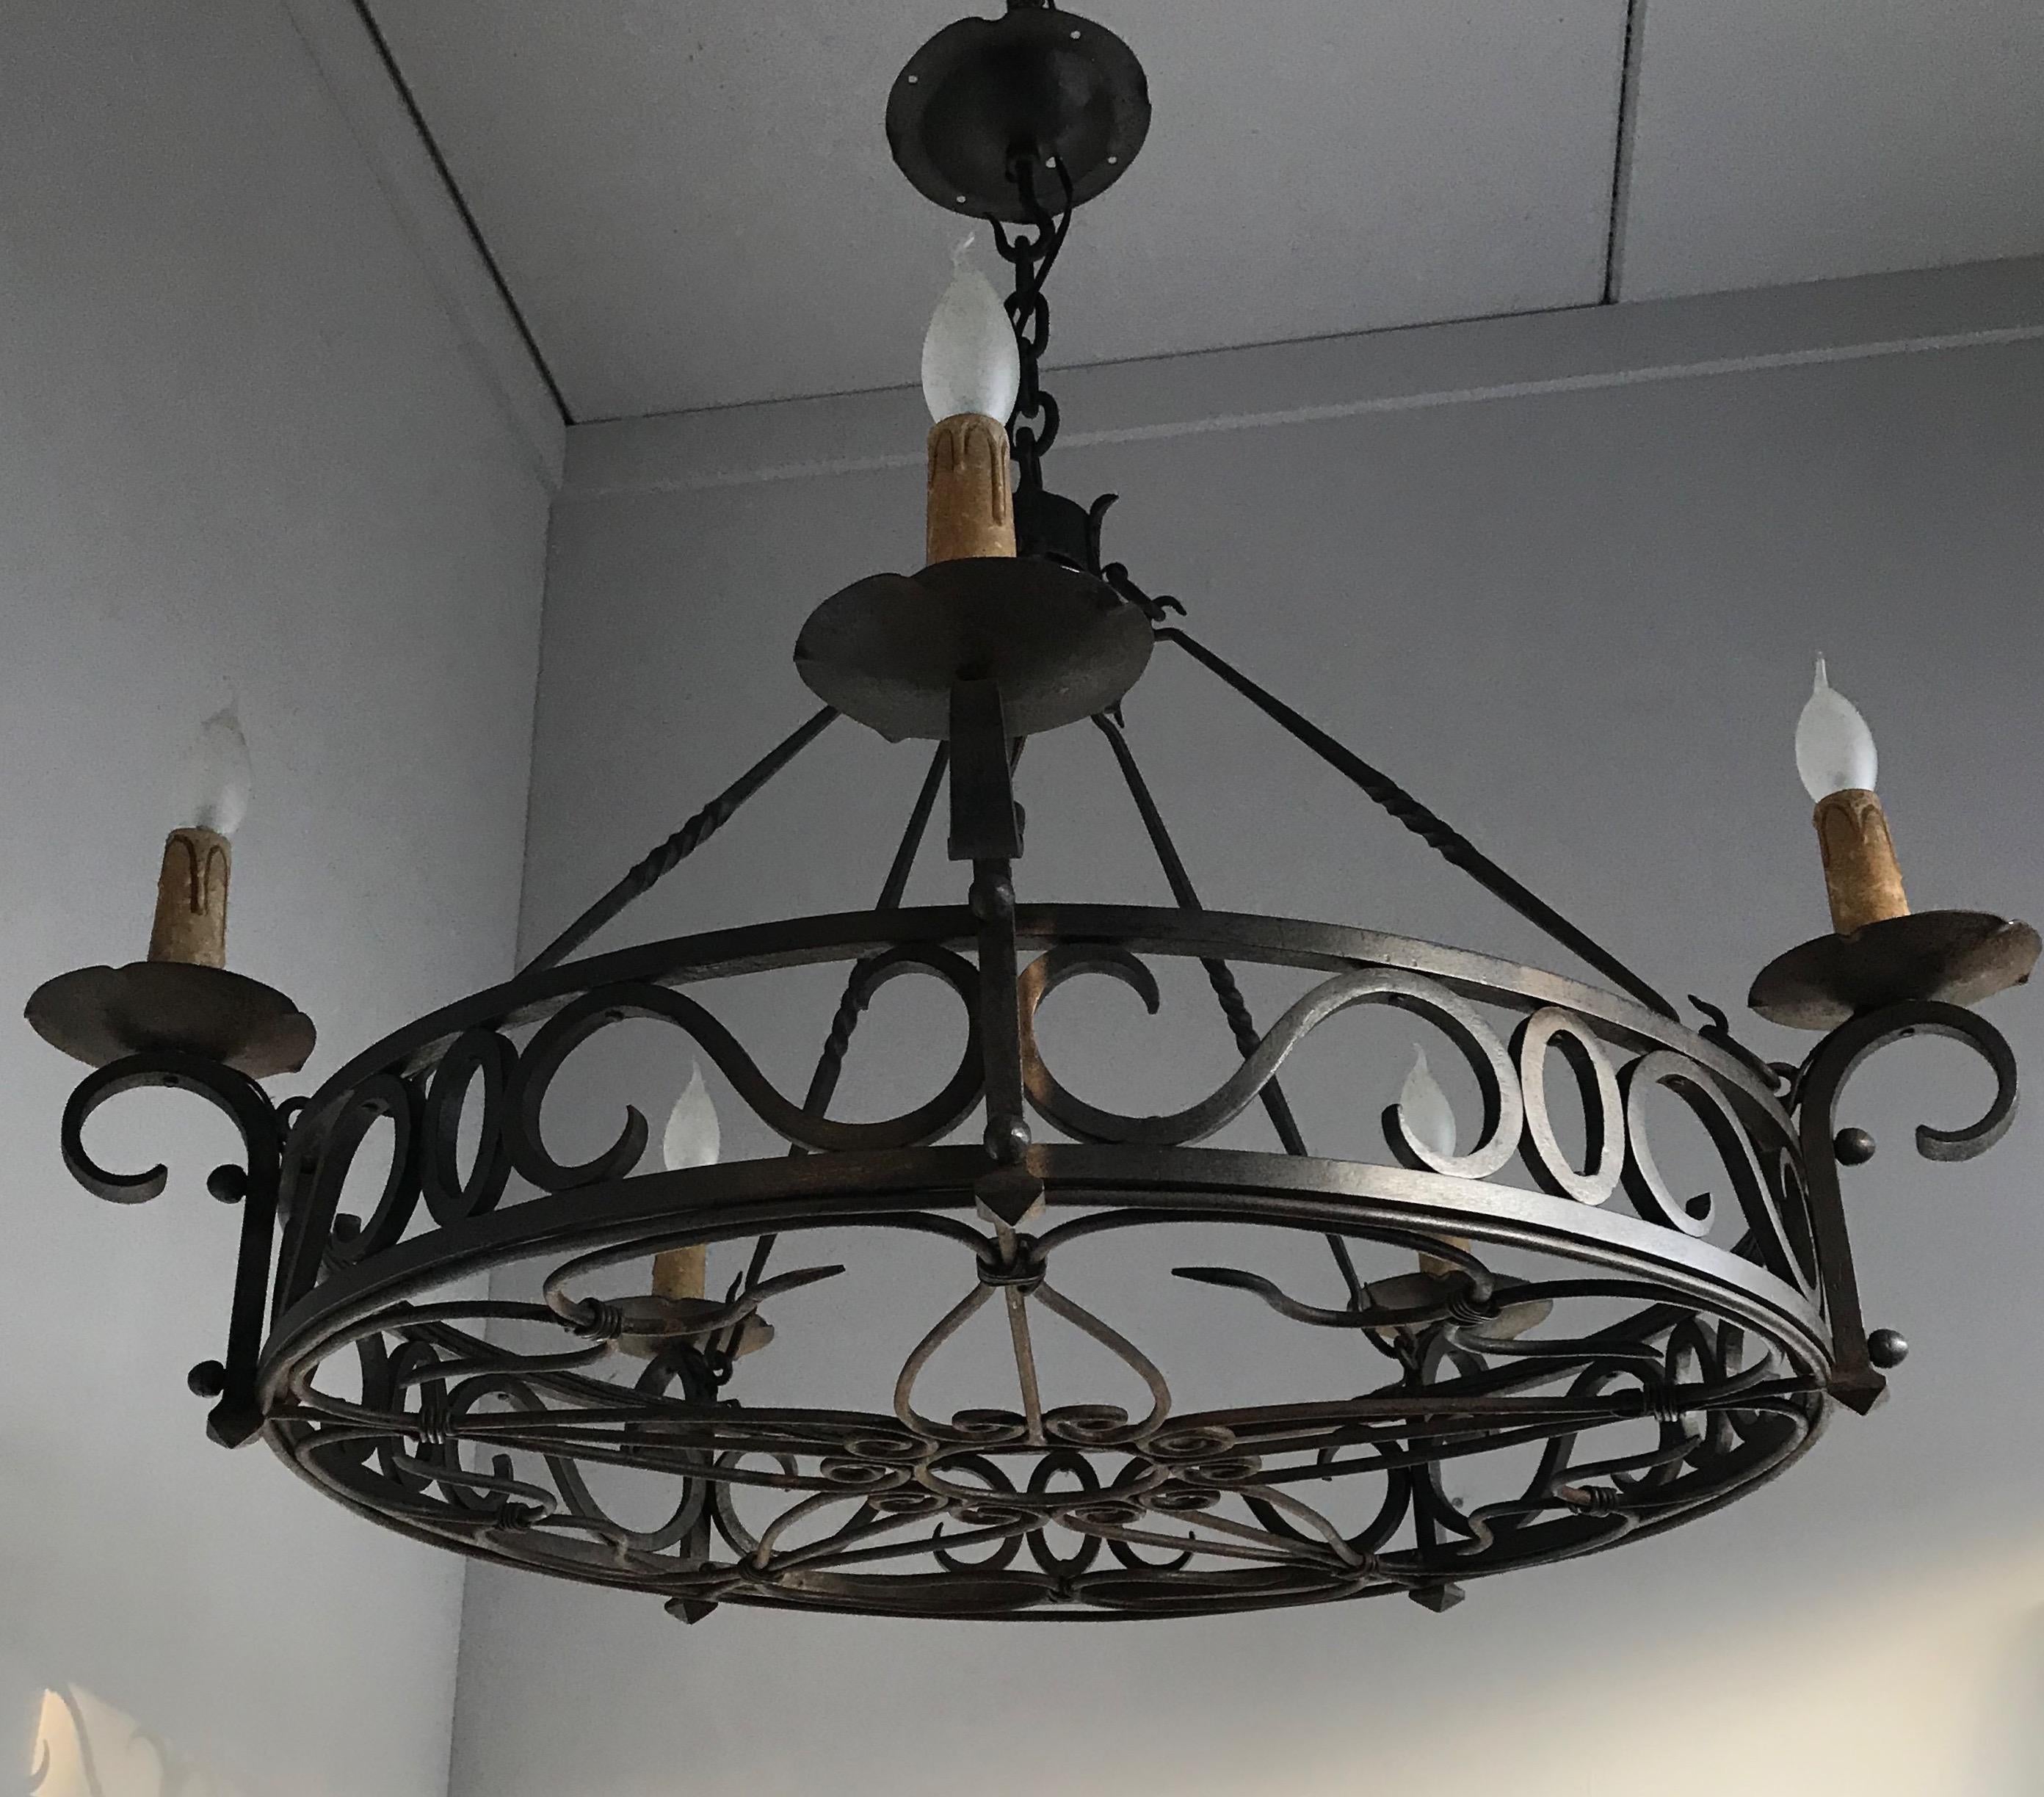 Large Arts & Crafts Wrought Iron Chandelier for Dining Room or Restaurant Etc. 9